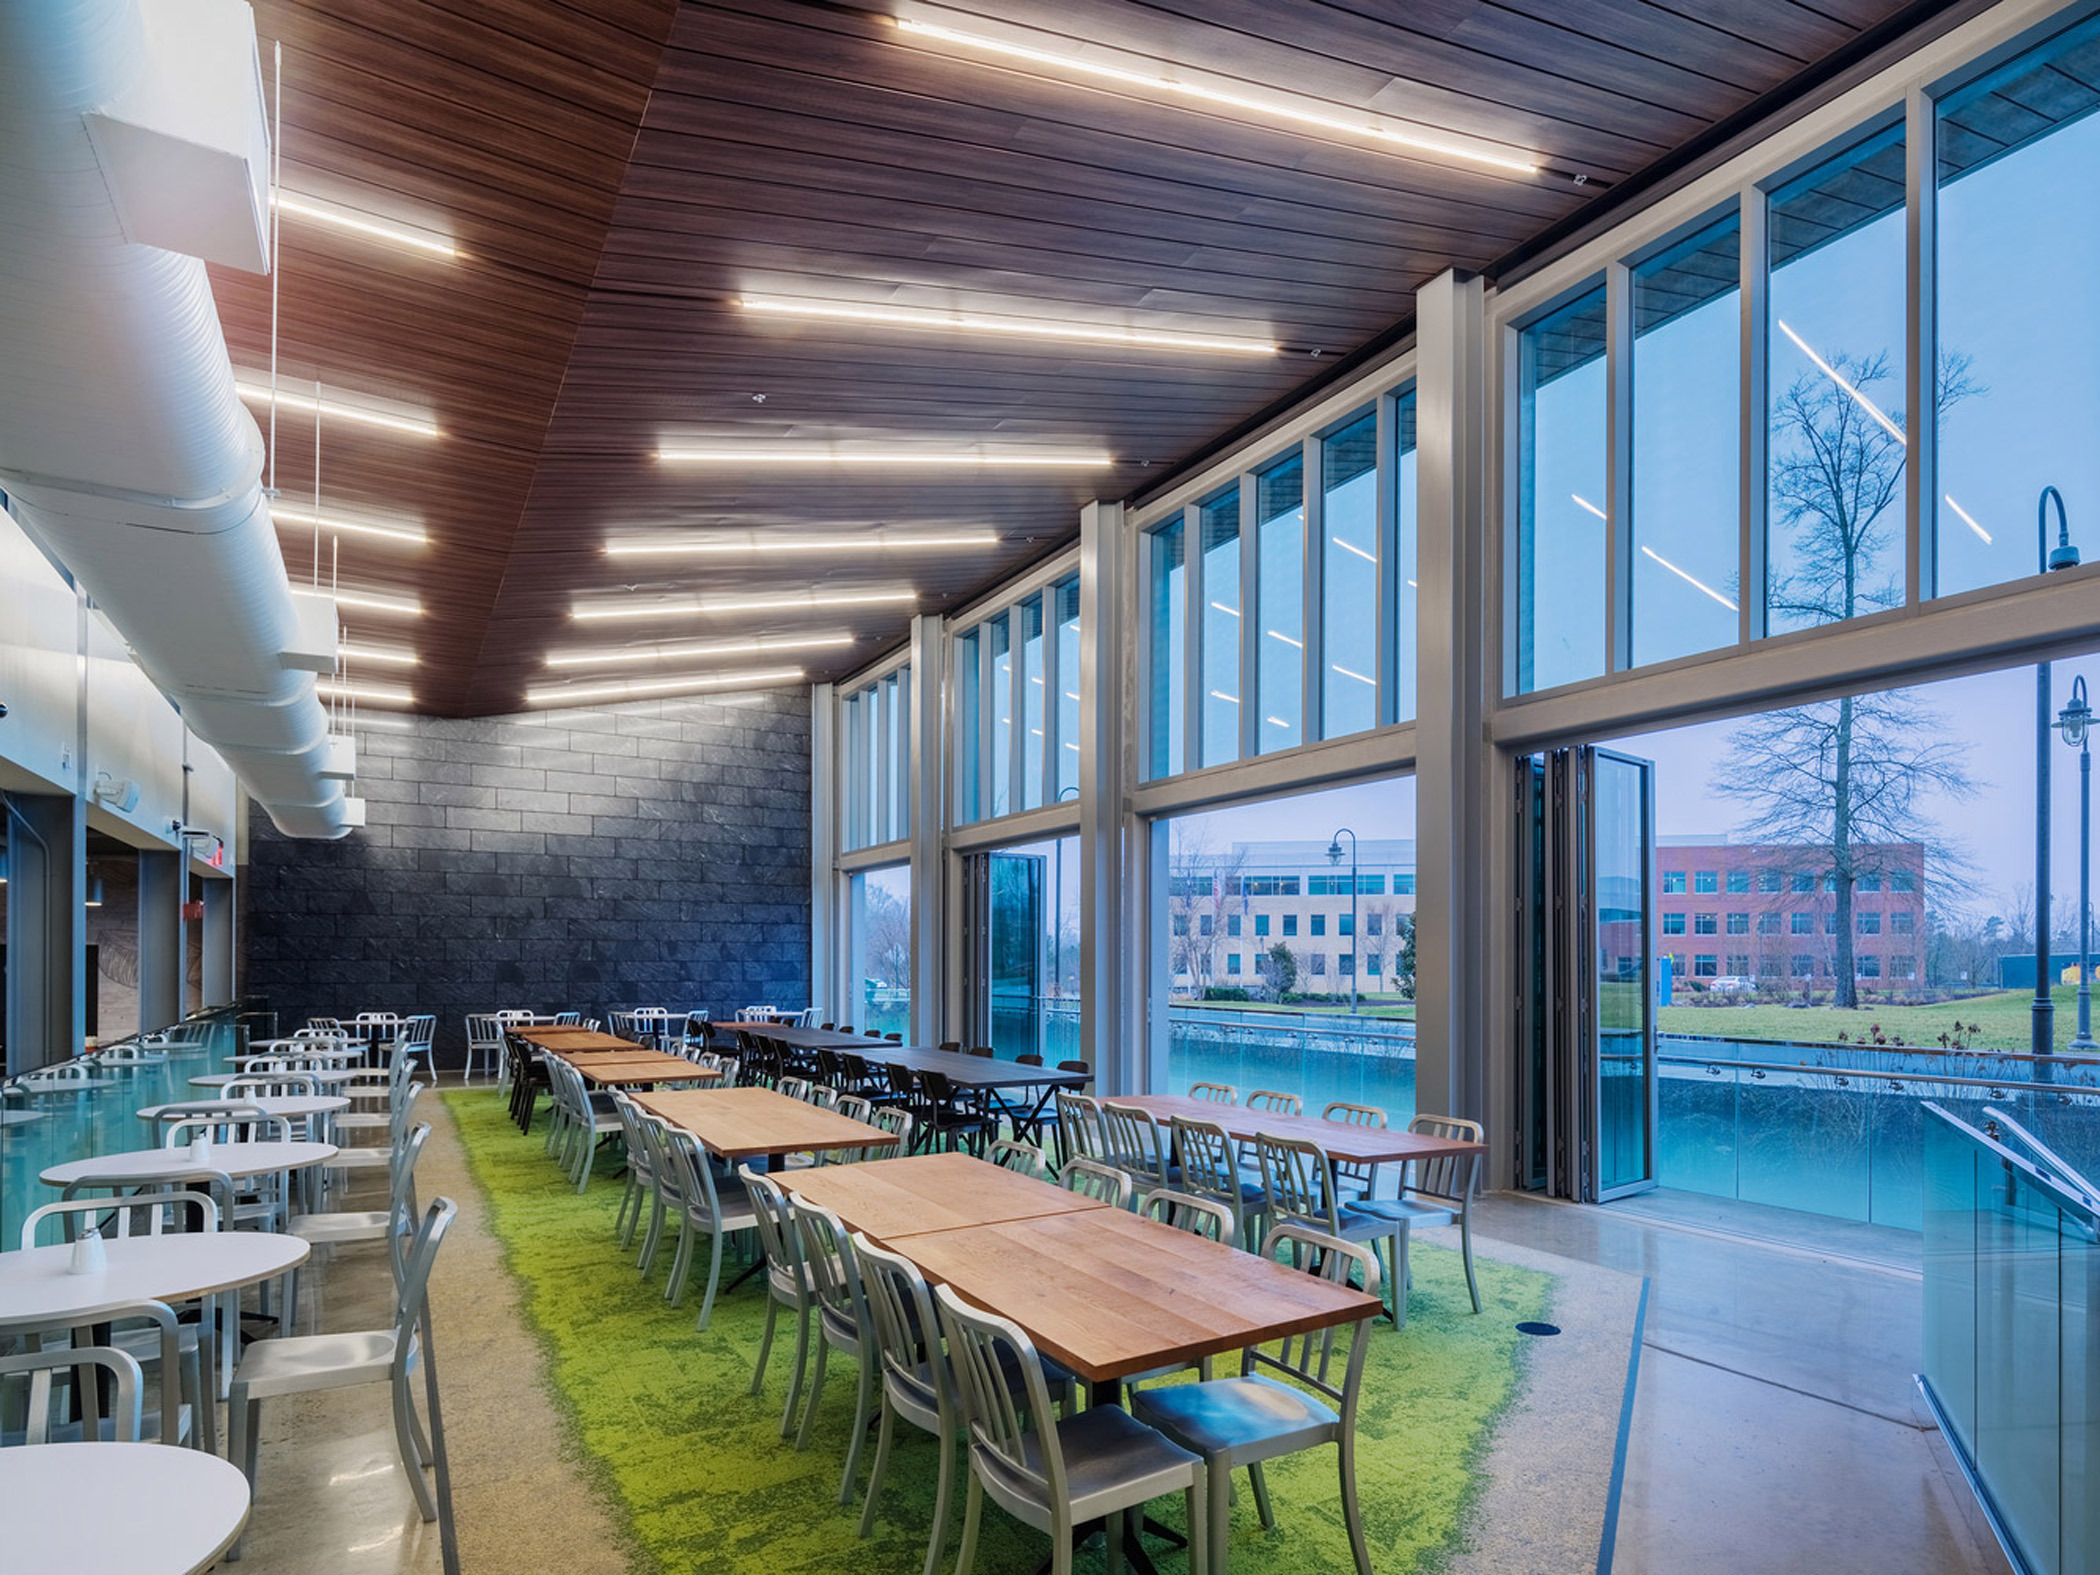 Spacious dining hall boasting high ceilings with wooden slats, wall-to-wall glazing providing ample natural light, and modern rectangular tables on a vibrant green carpet, complementing the exterior view of serene waters and architecture.